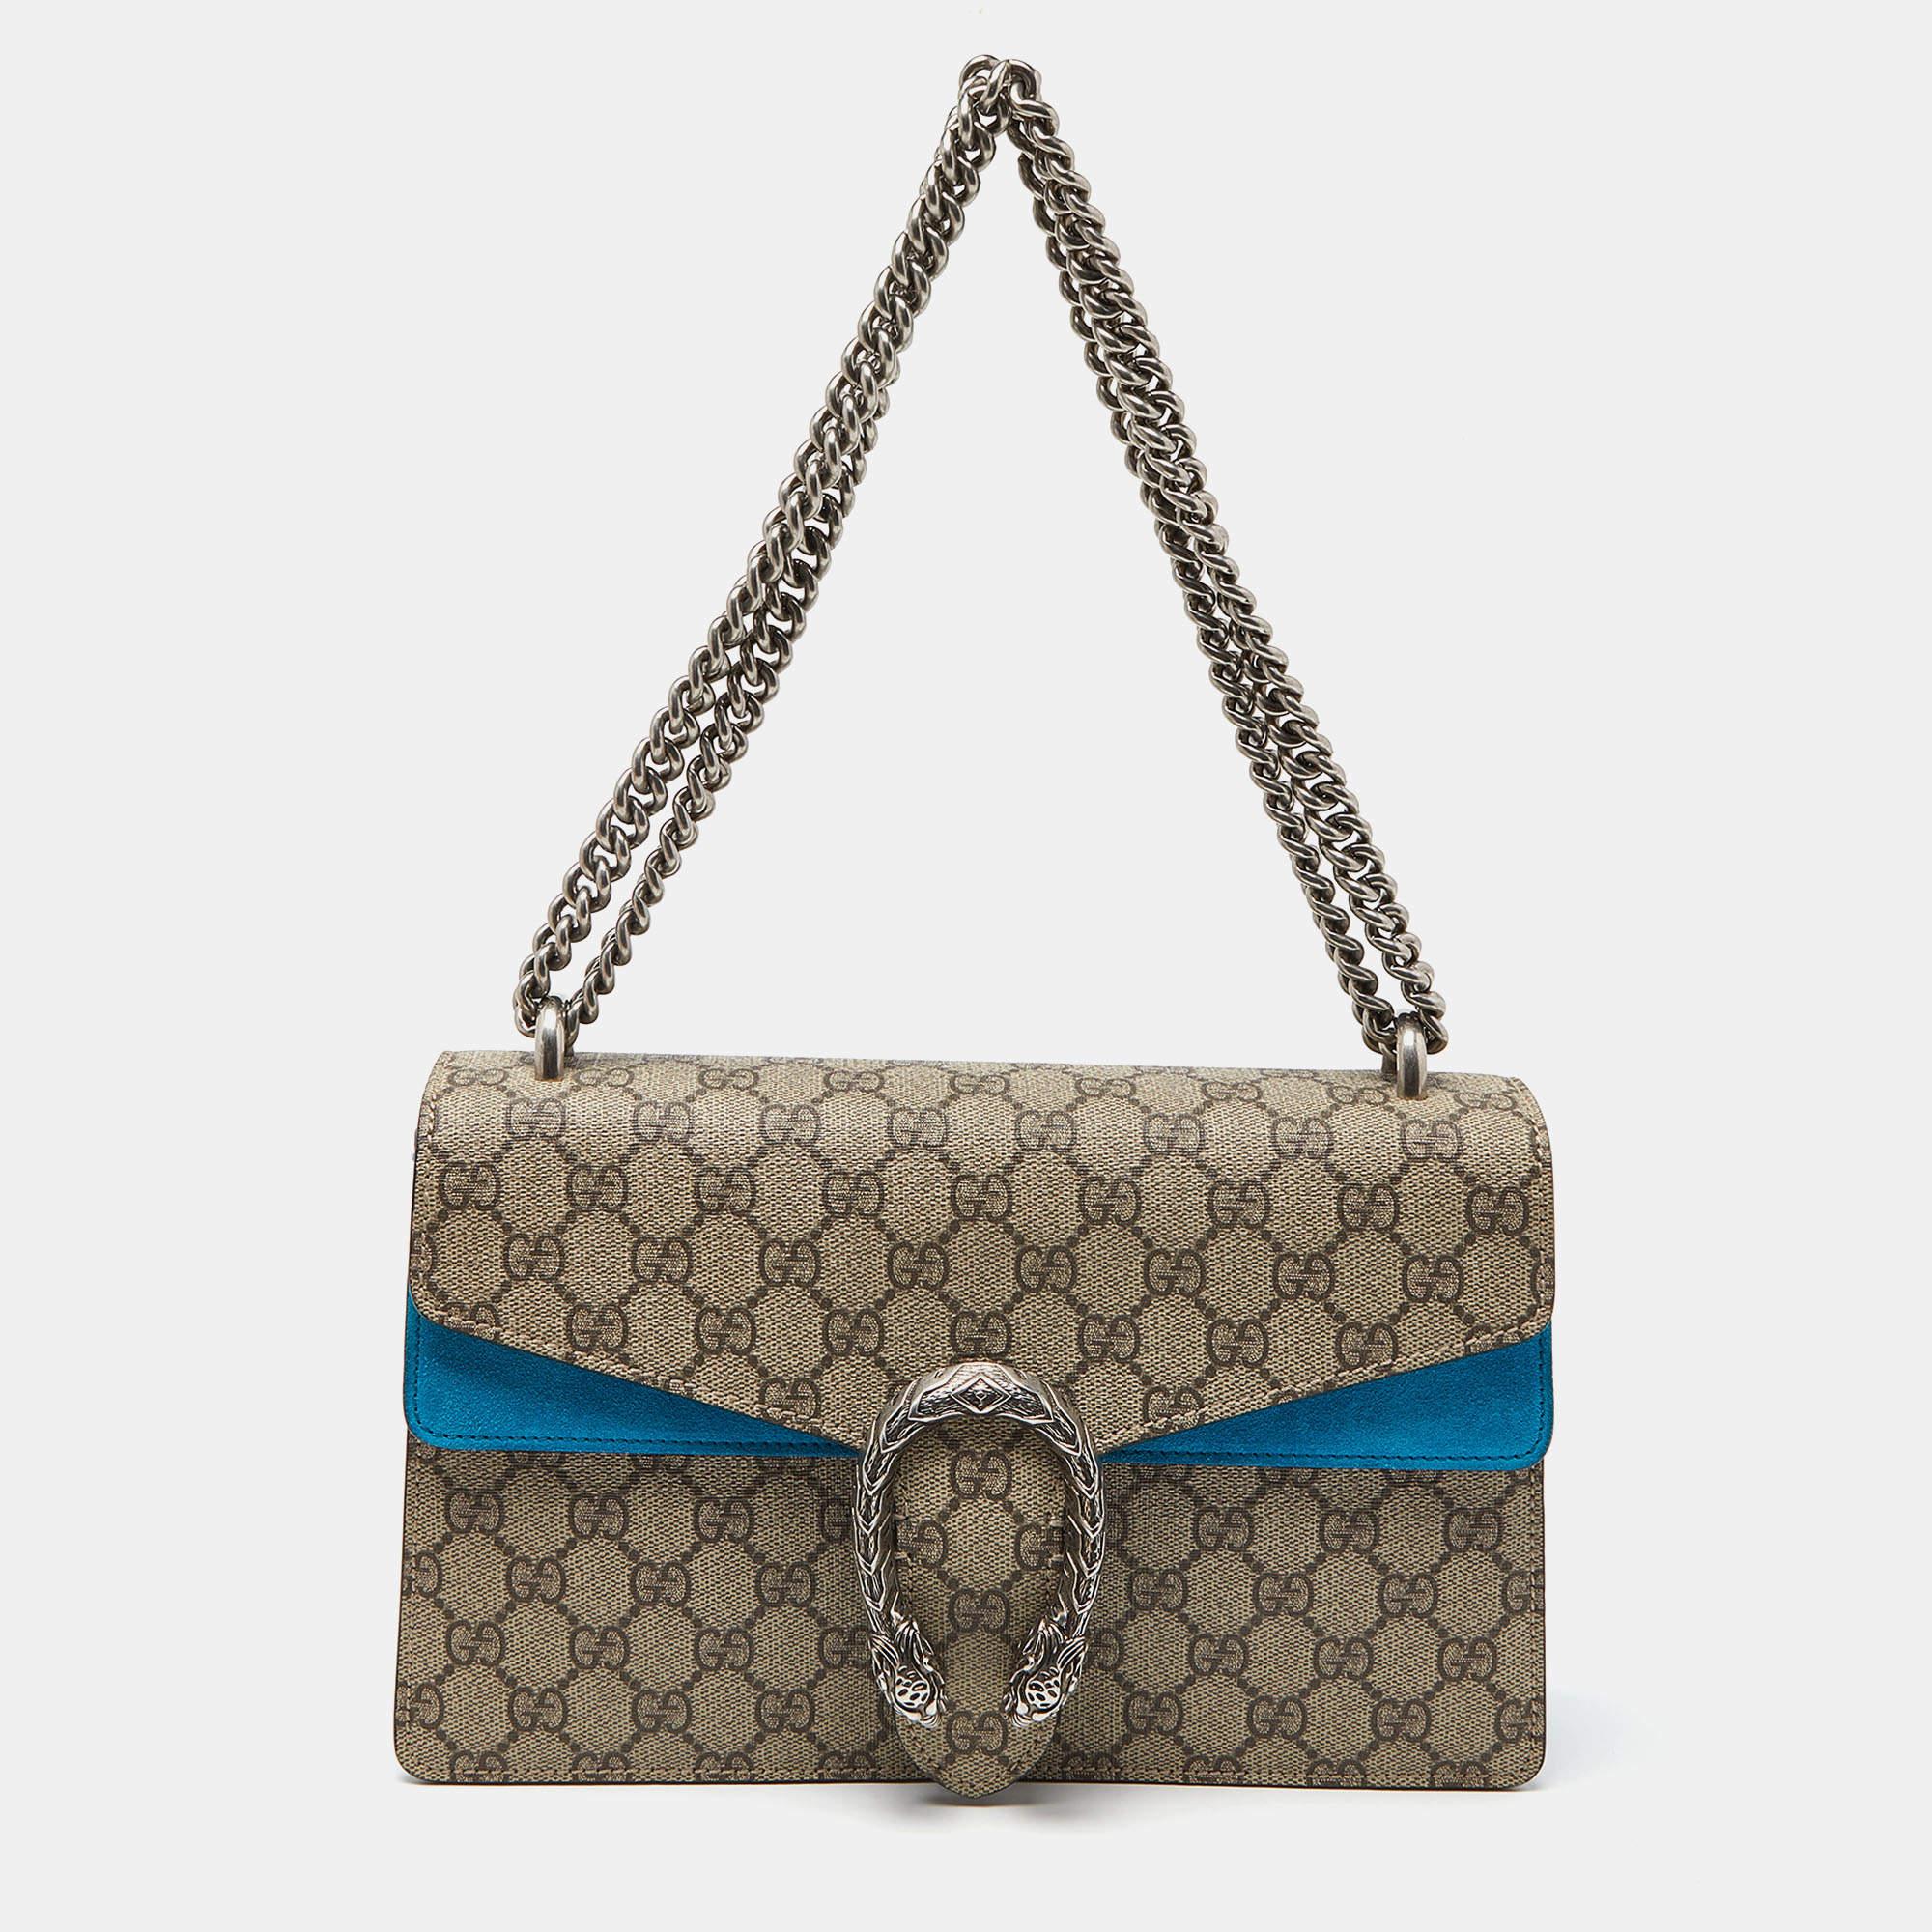 Gucci Beige/Blue GG Supreme Canvas and Suede Small Dionysus Shoulder Bag For Sale 8